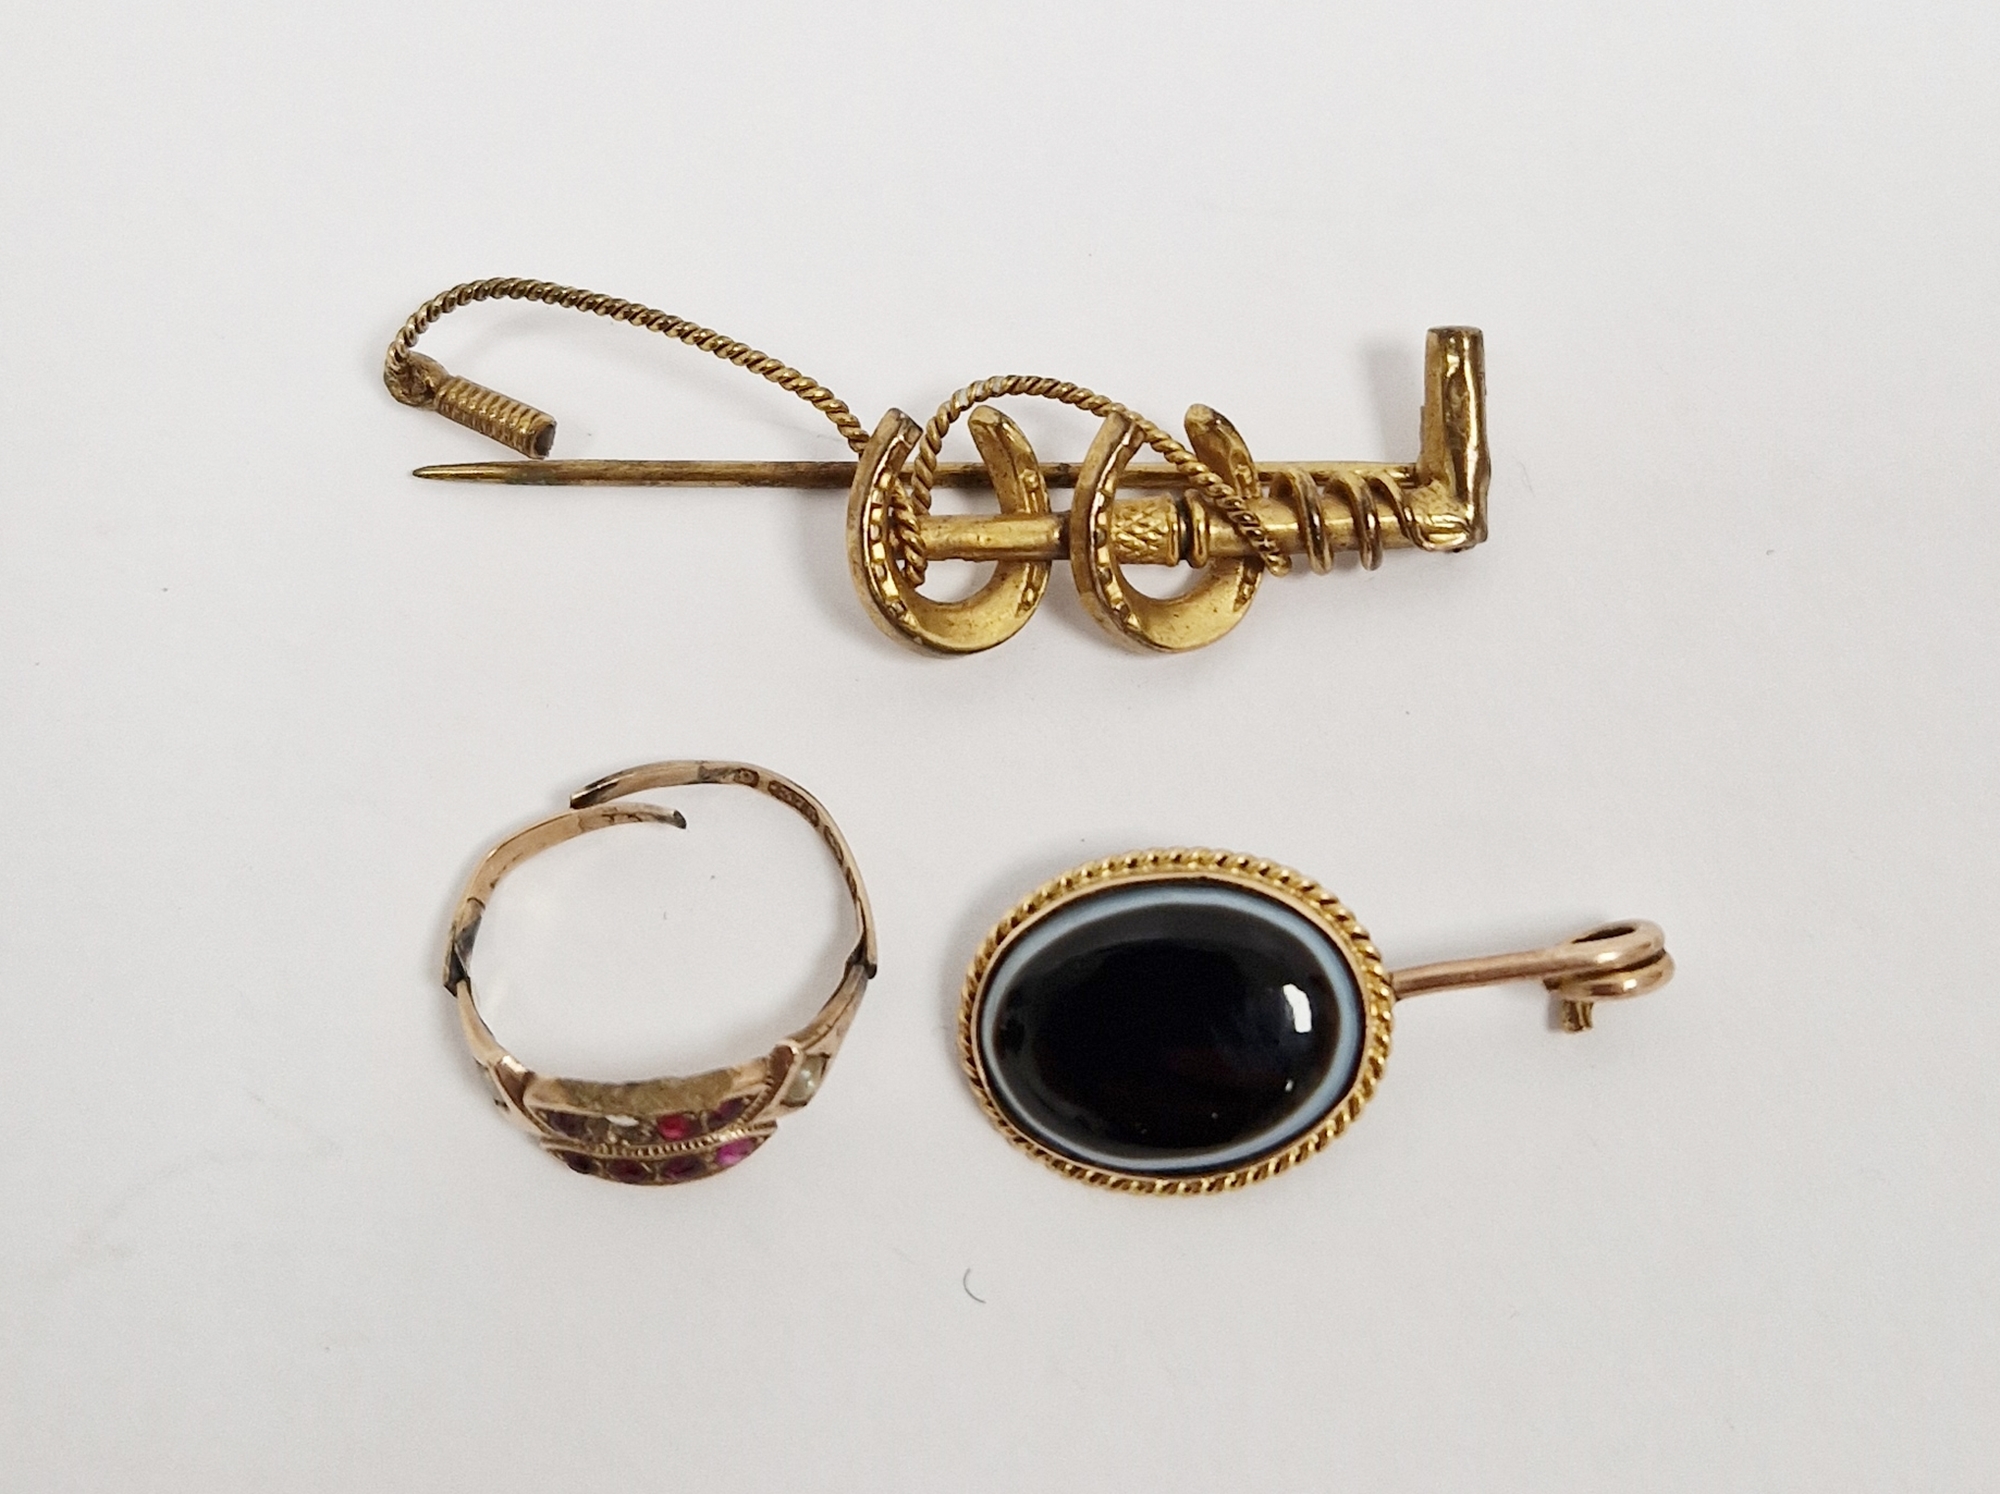 9ct gold bar brooch, horseshoe and crop (damaged), a gold-coloured metal and onyx brooch (